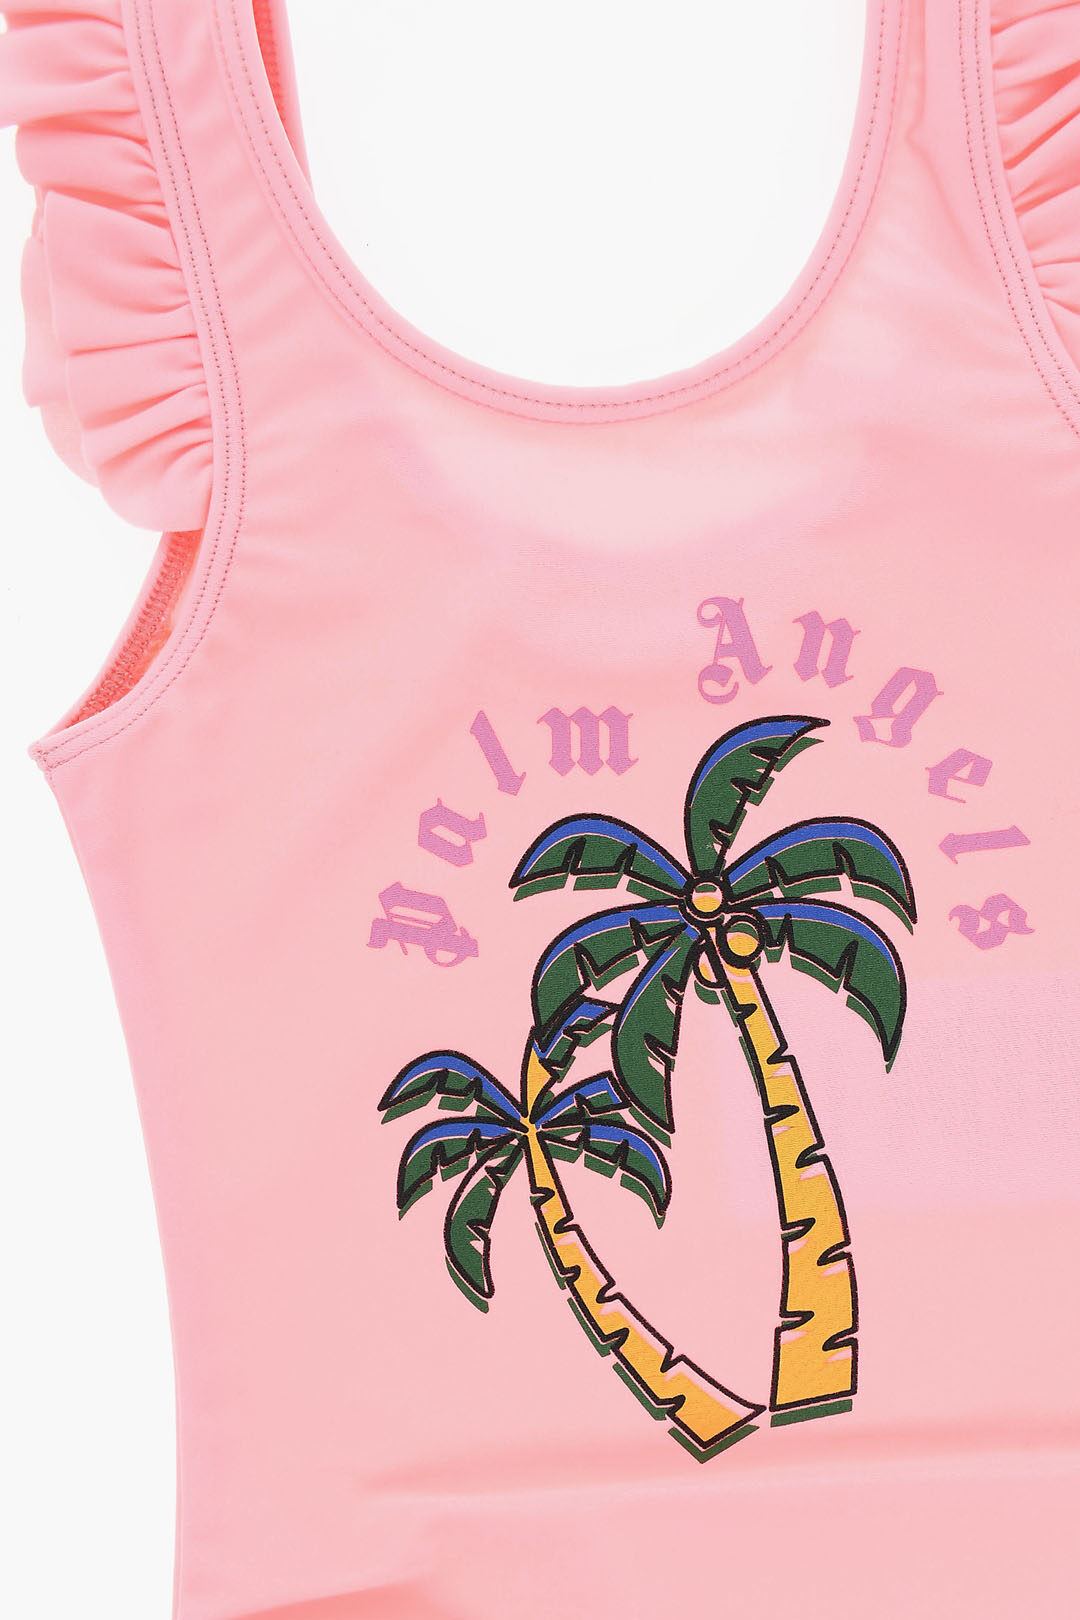 Palm Angels Outlet: swimsuit for girls - Pink